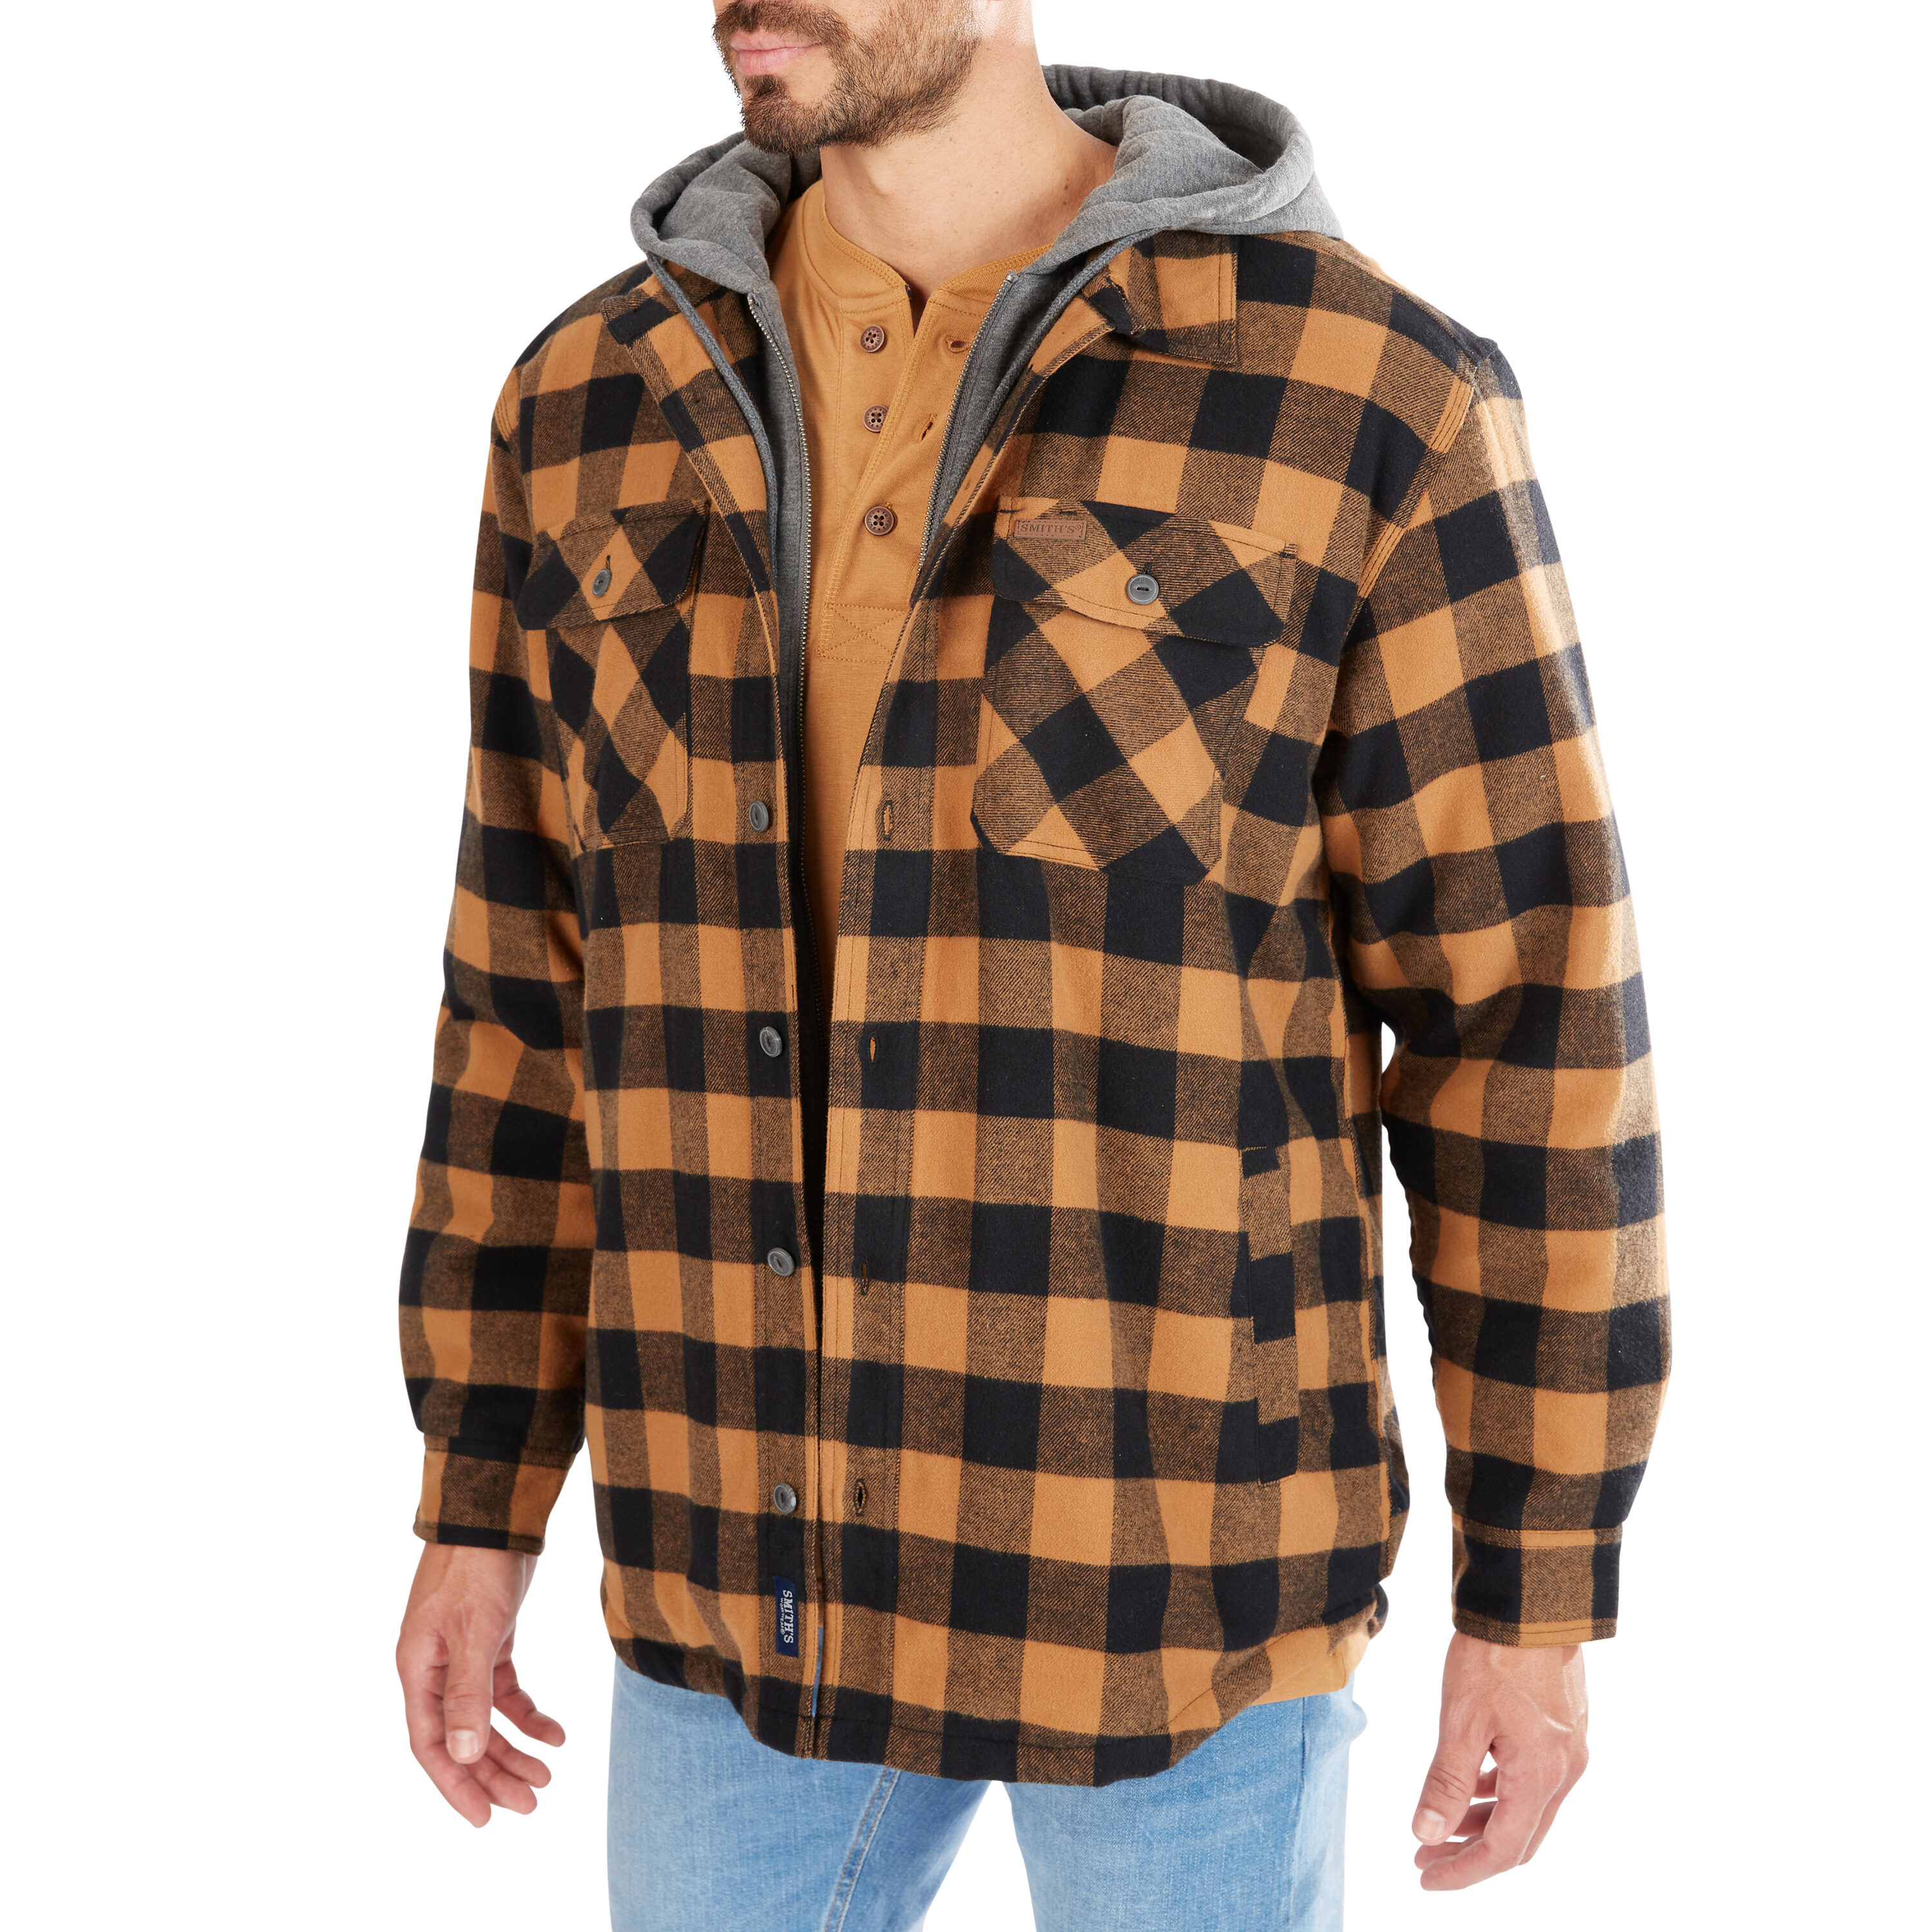 Smith's Workwear Sherpa-Lined Hooded Flannel Shirt Jacket in the